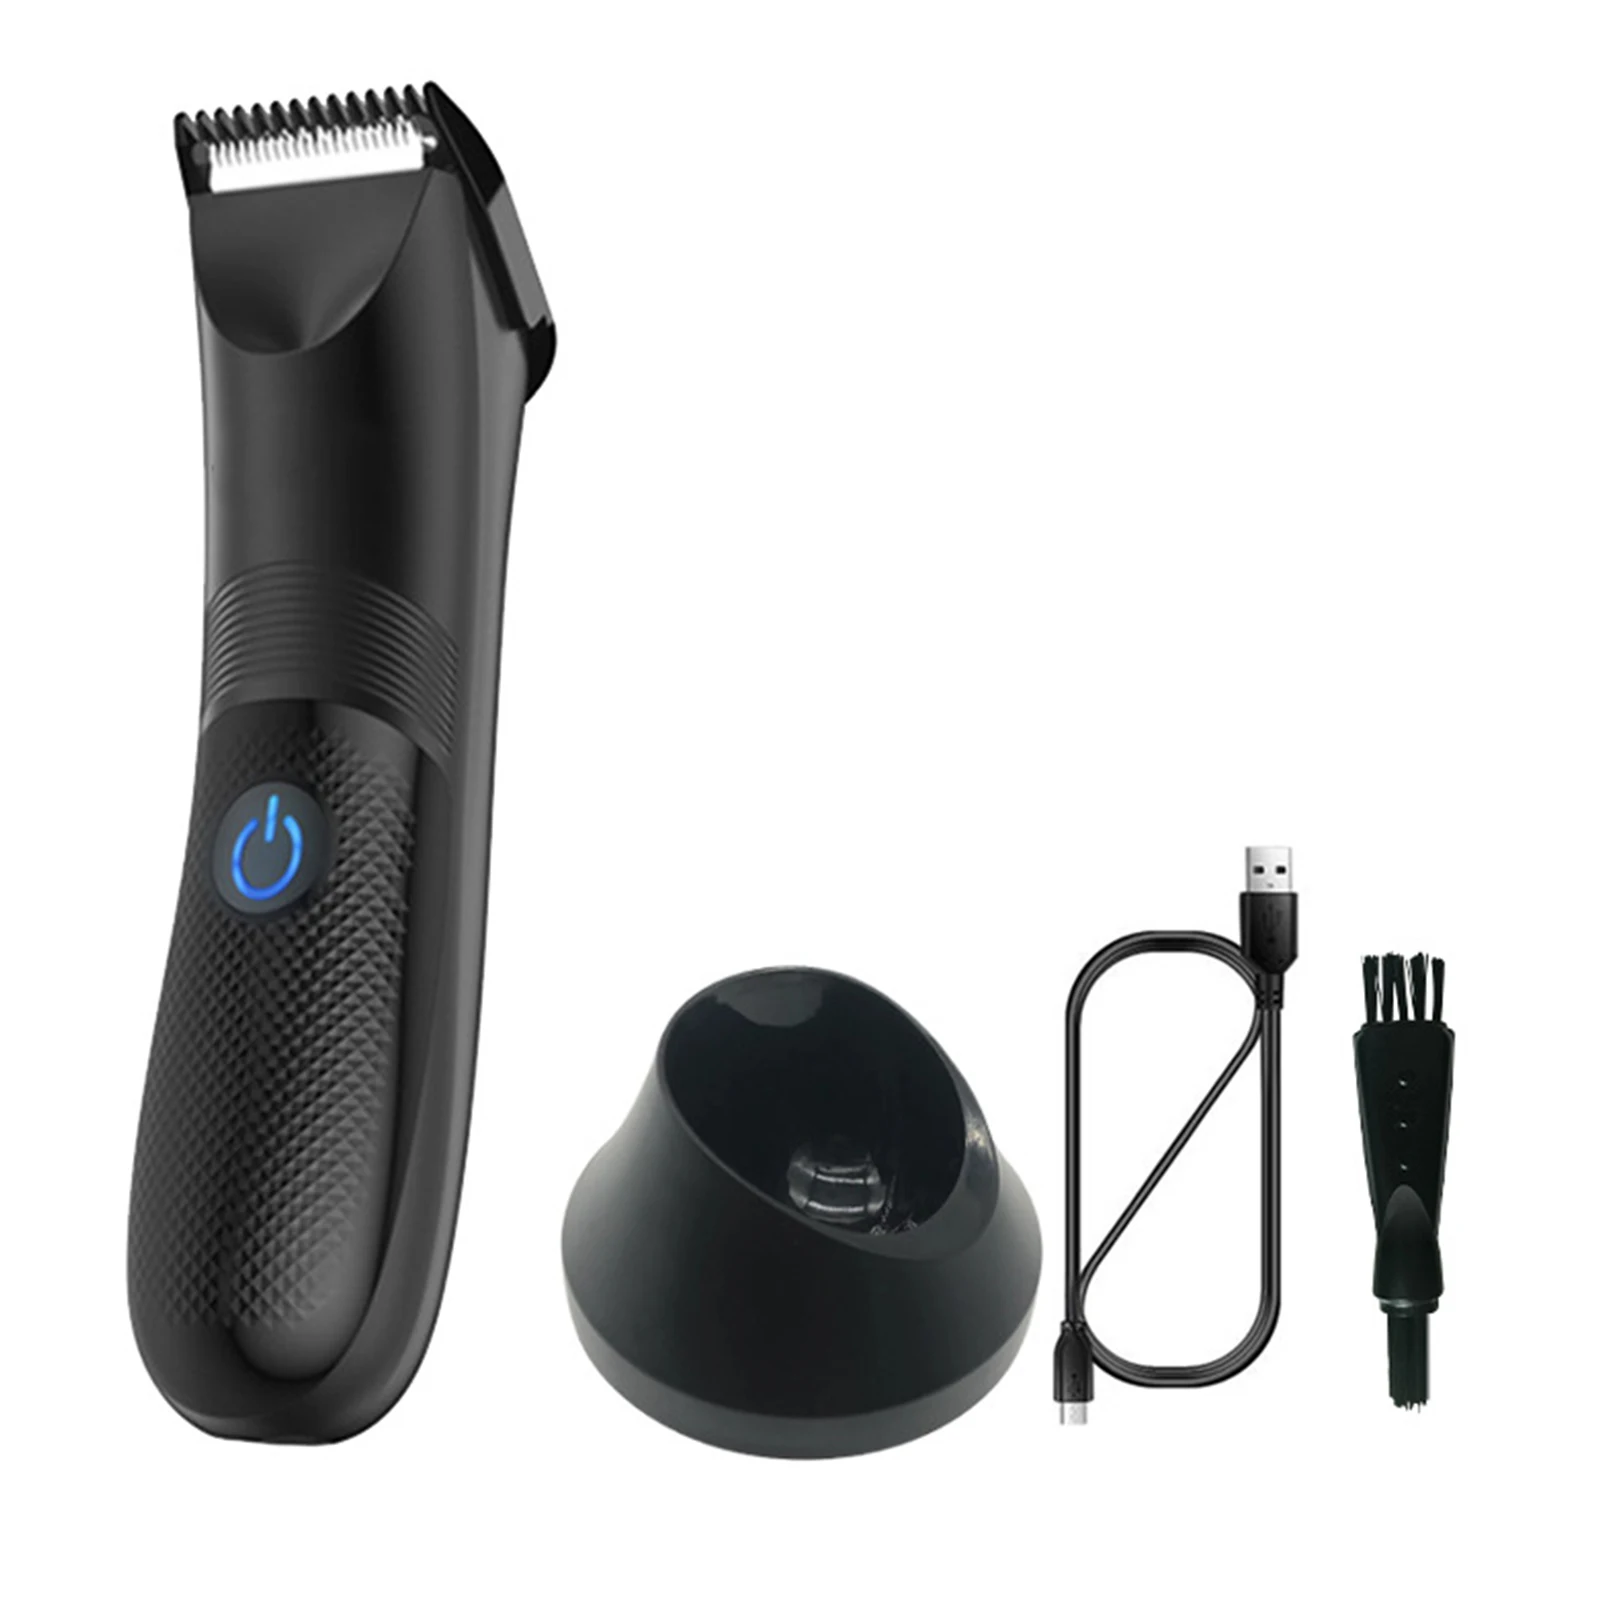 

Men Body Trimmer Beard USB Rechargeable Pubic Hair Electric Shaver With LED Light Chest Legs Groin IPX7 Waterproof Grooming